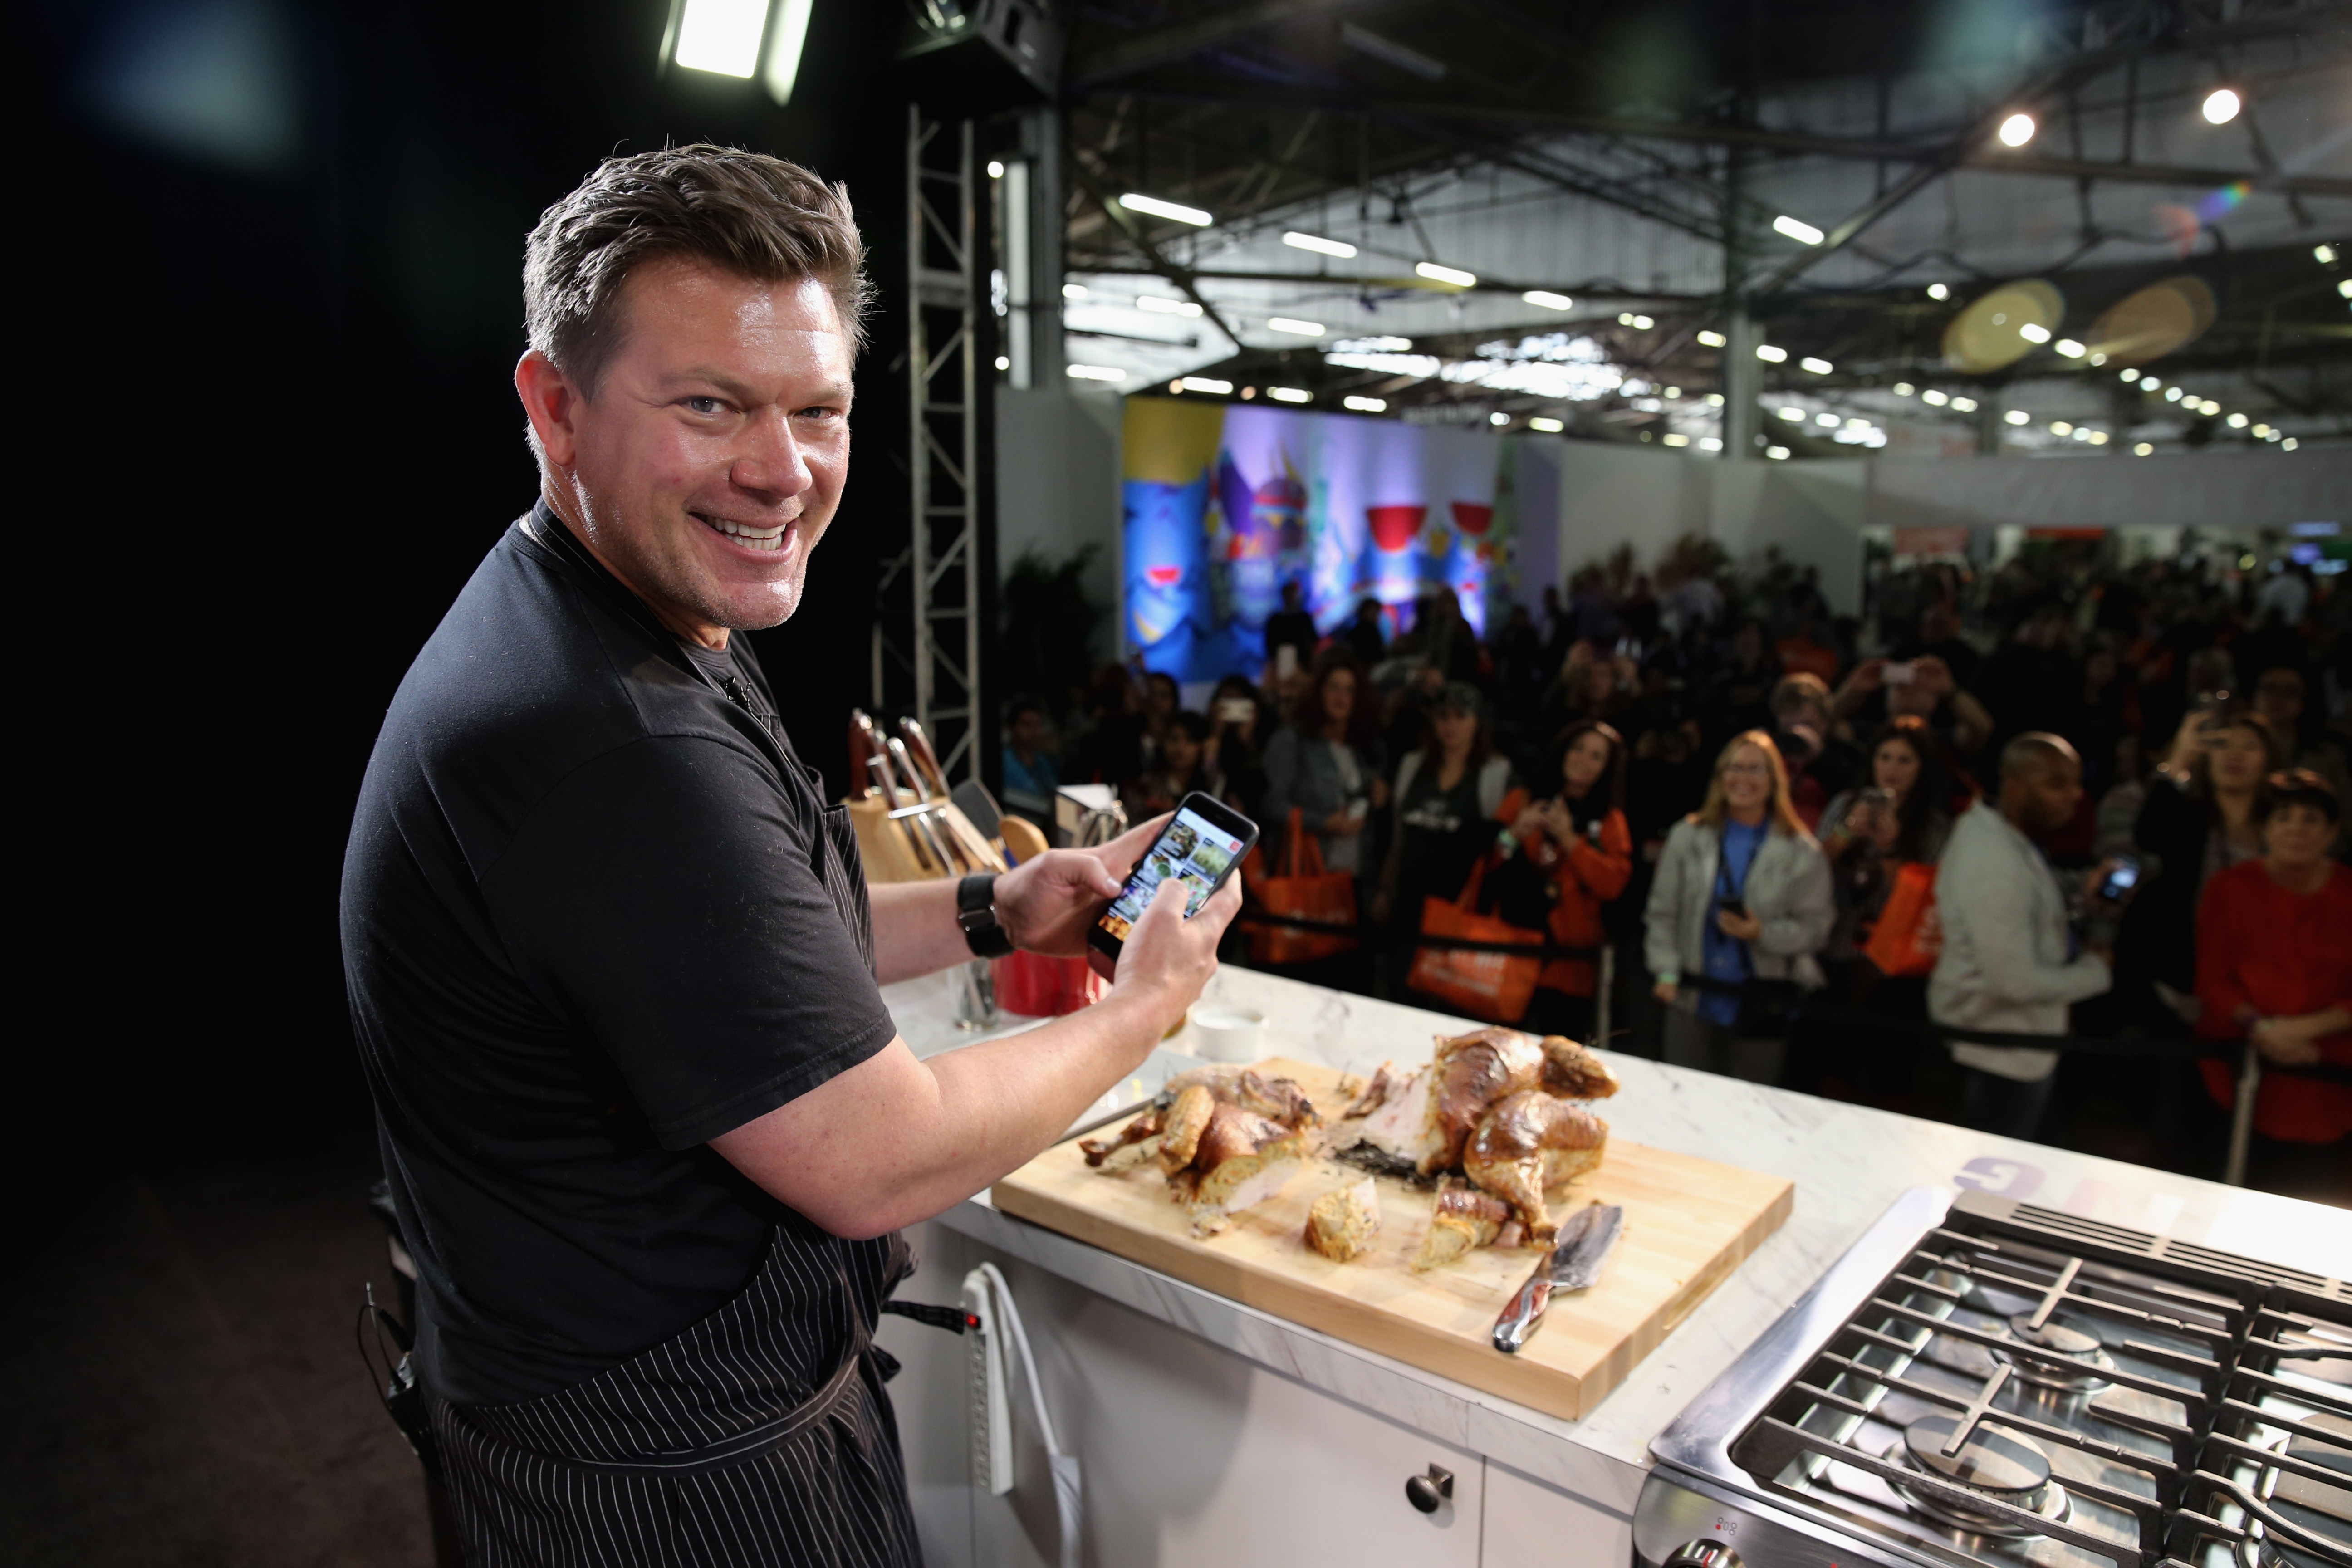 Chef Tyler Florence wears a short-sleeved black shirt as he prepares a meal for a 2015 Food Network event audience.